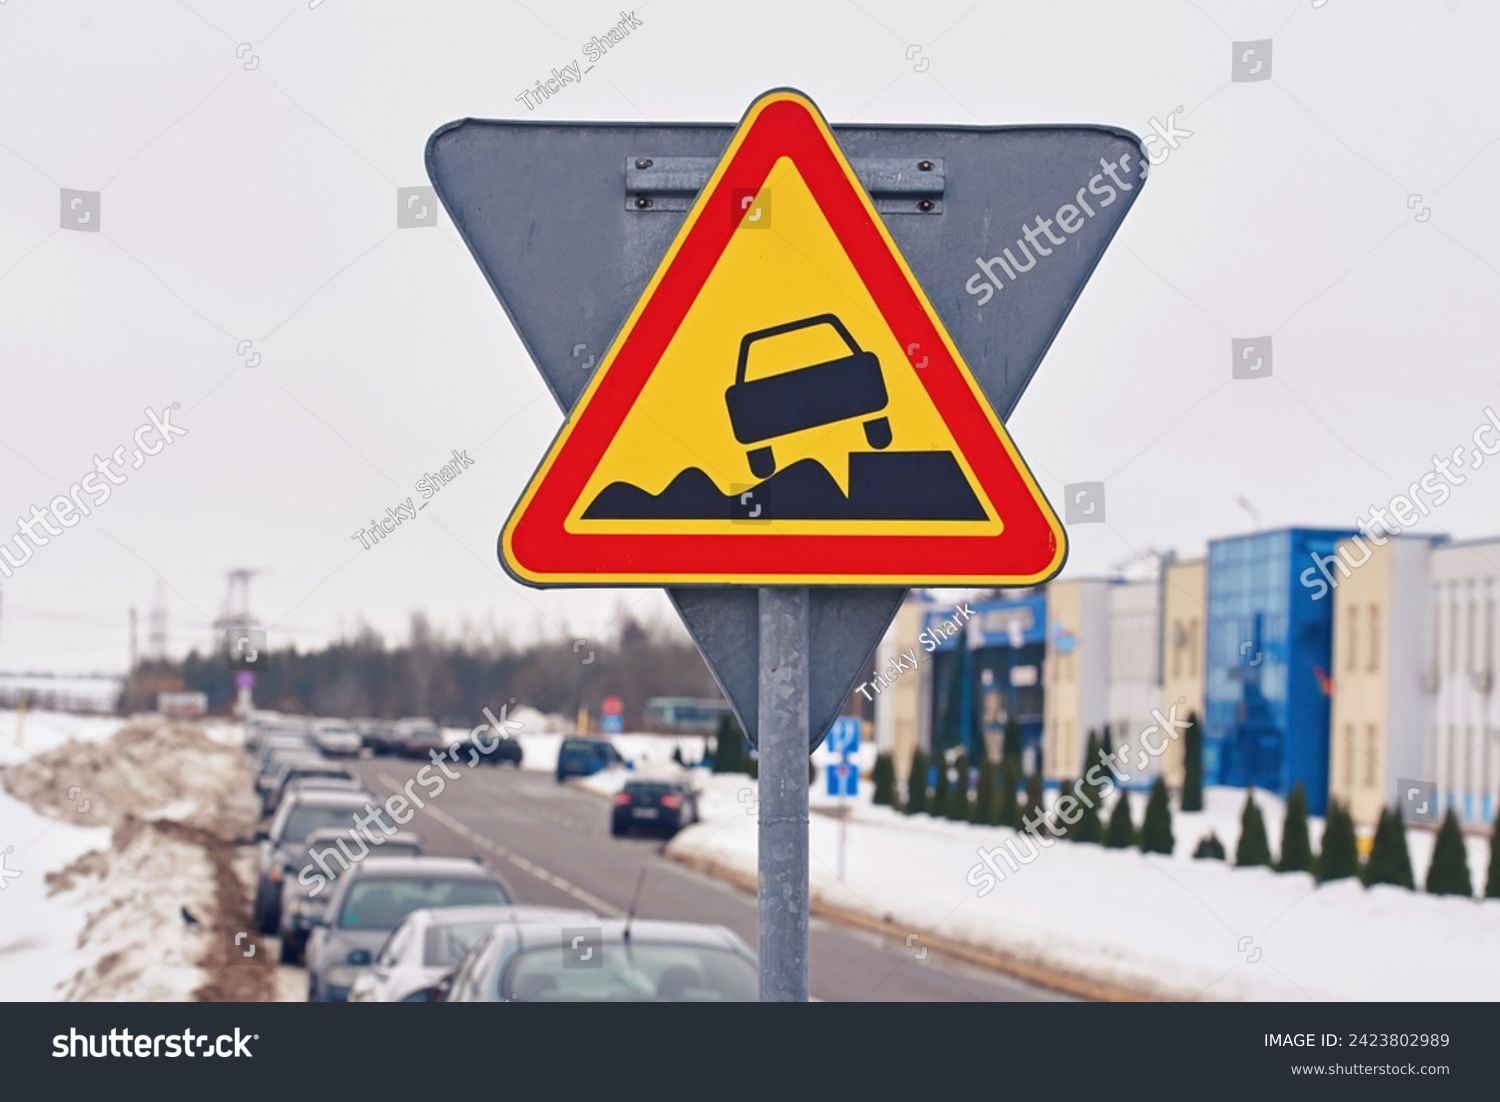 Soft verges, Warning sign, traffic sign and cars parked in row along dangerous snowy roadside on background. Soft verge road sign, car parked with traffic violation. Dangerous parking on soft roadside #2423802989